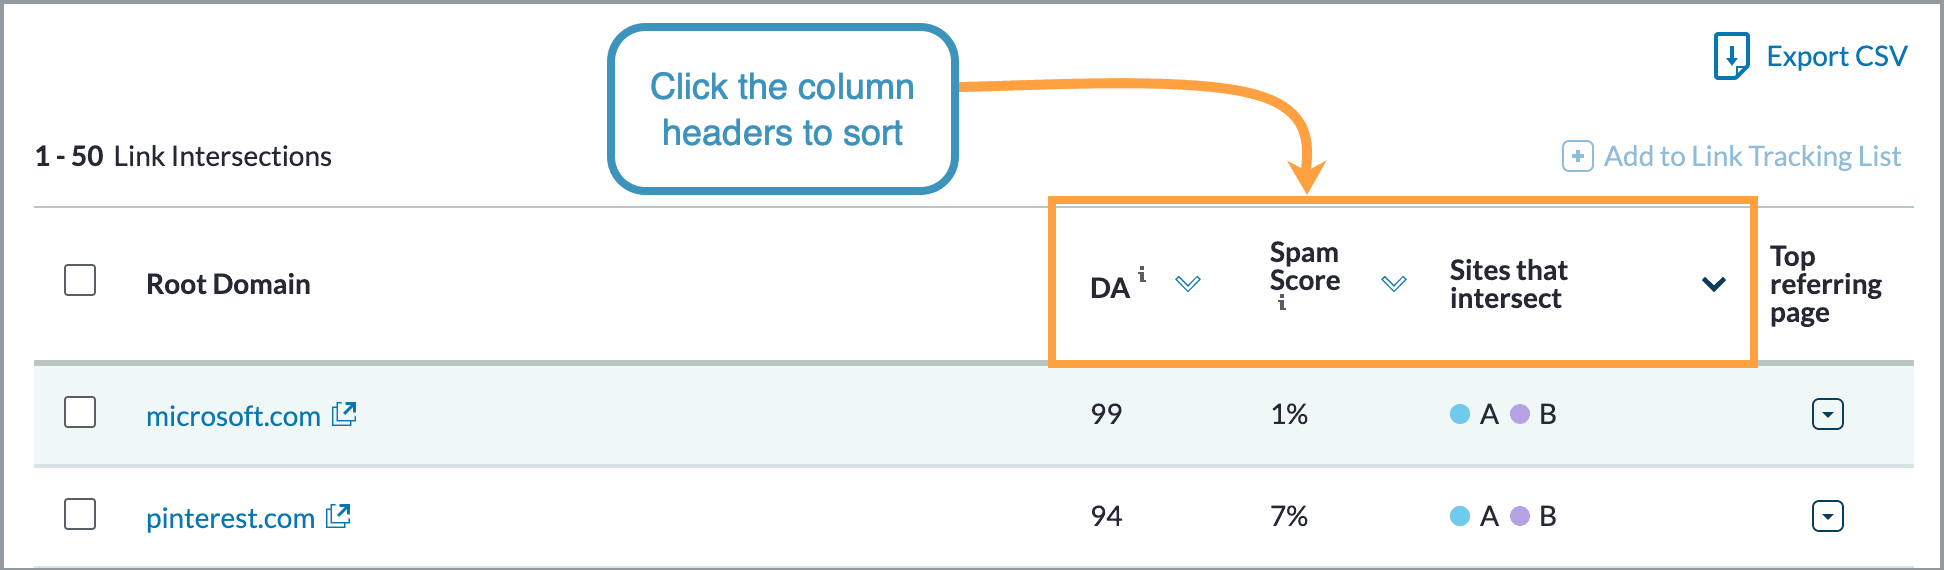 You can sort the results by DA, Spam Score, and how they intersect by clicking the column headers.